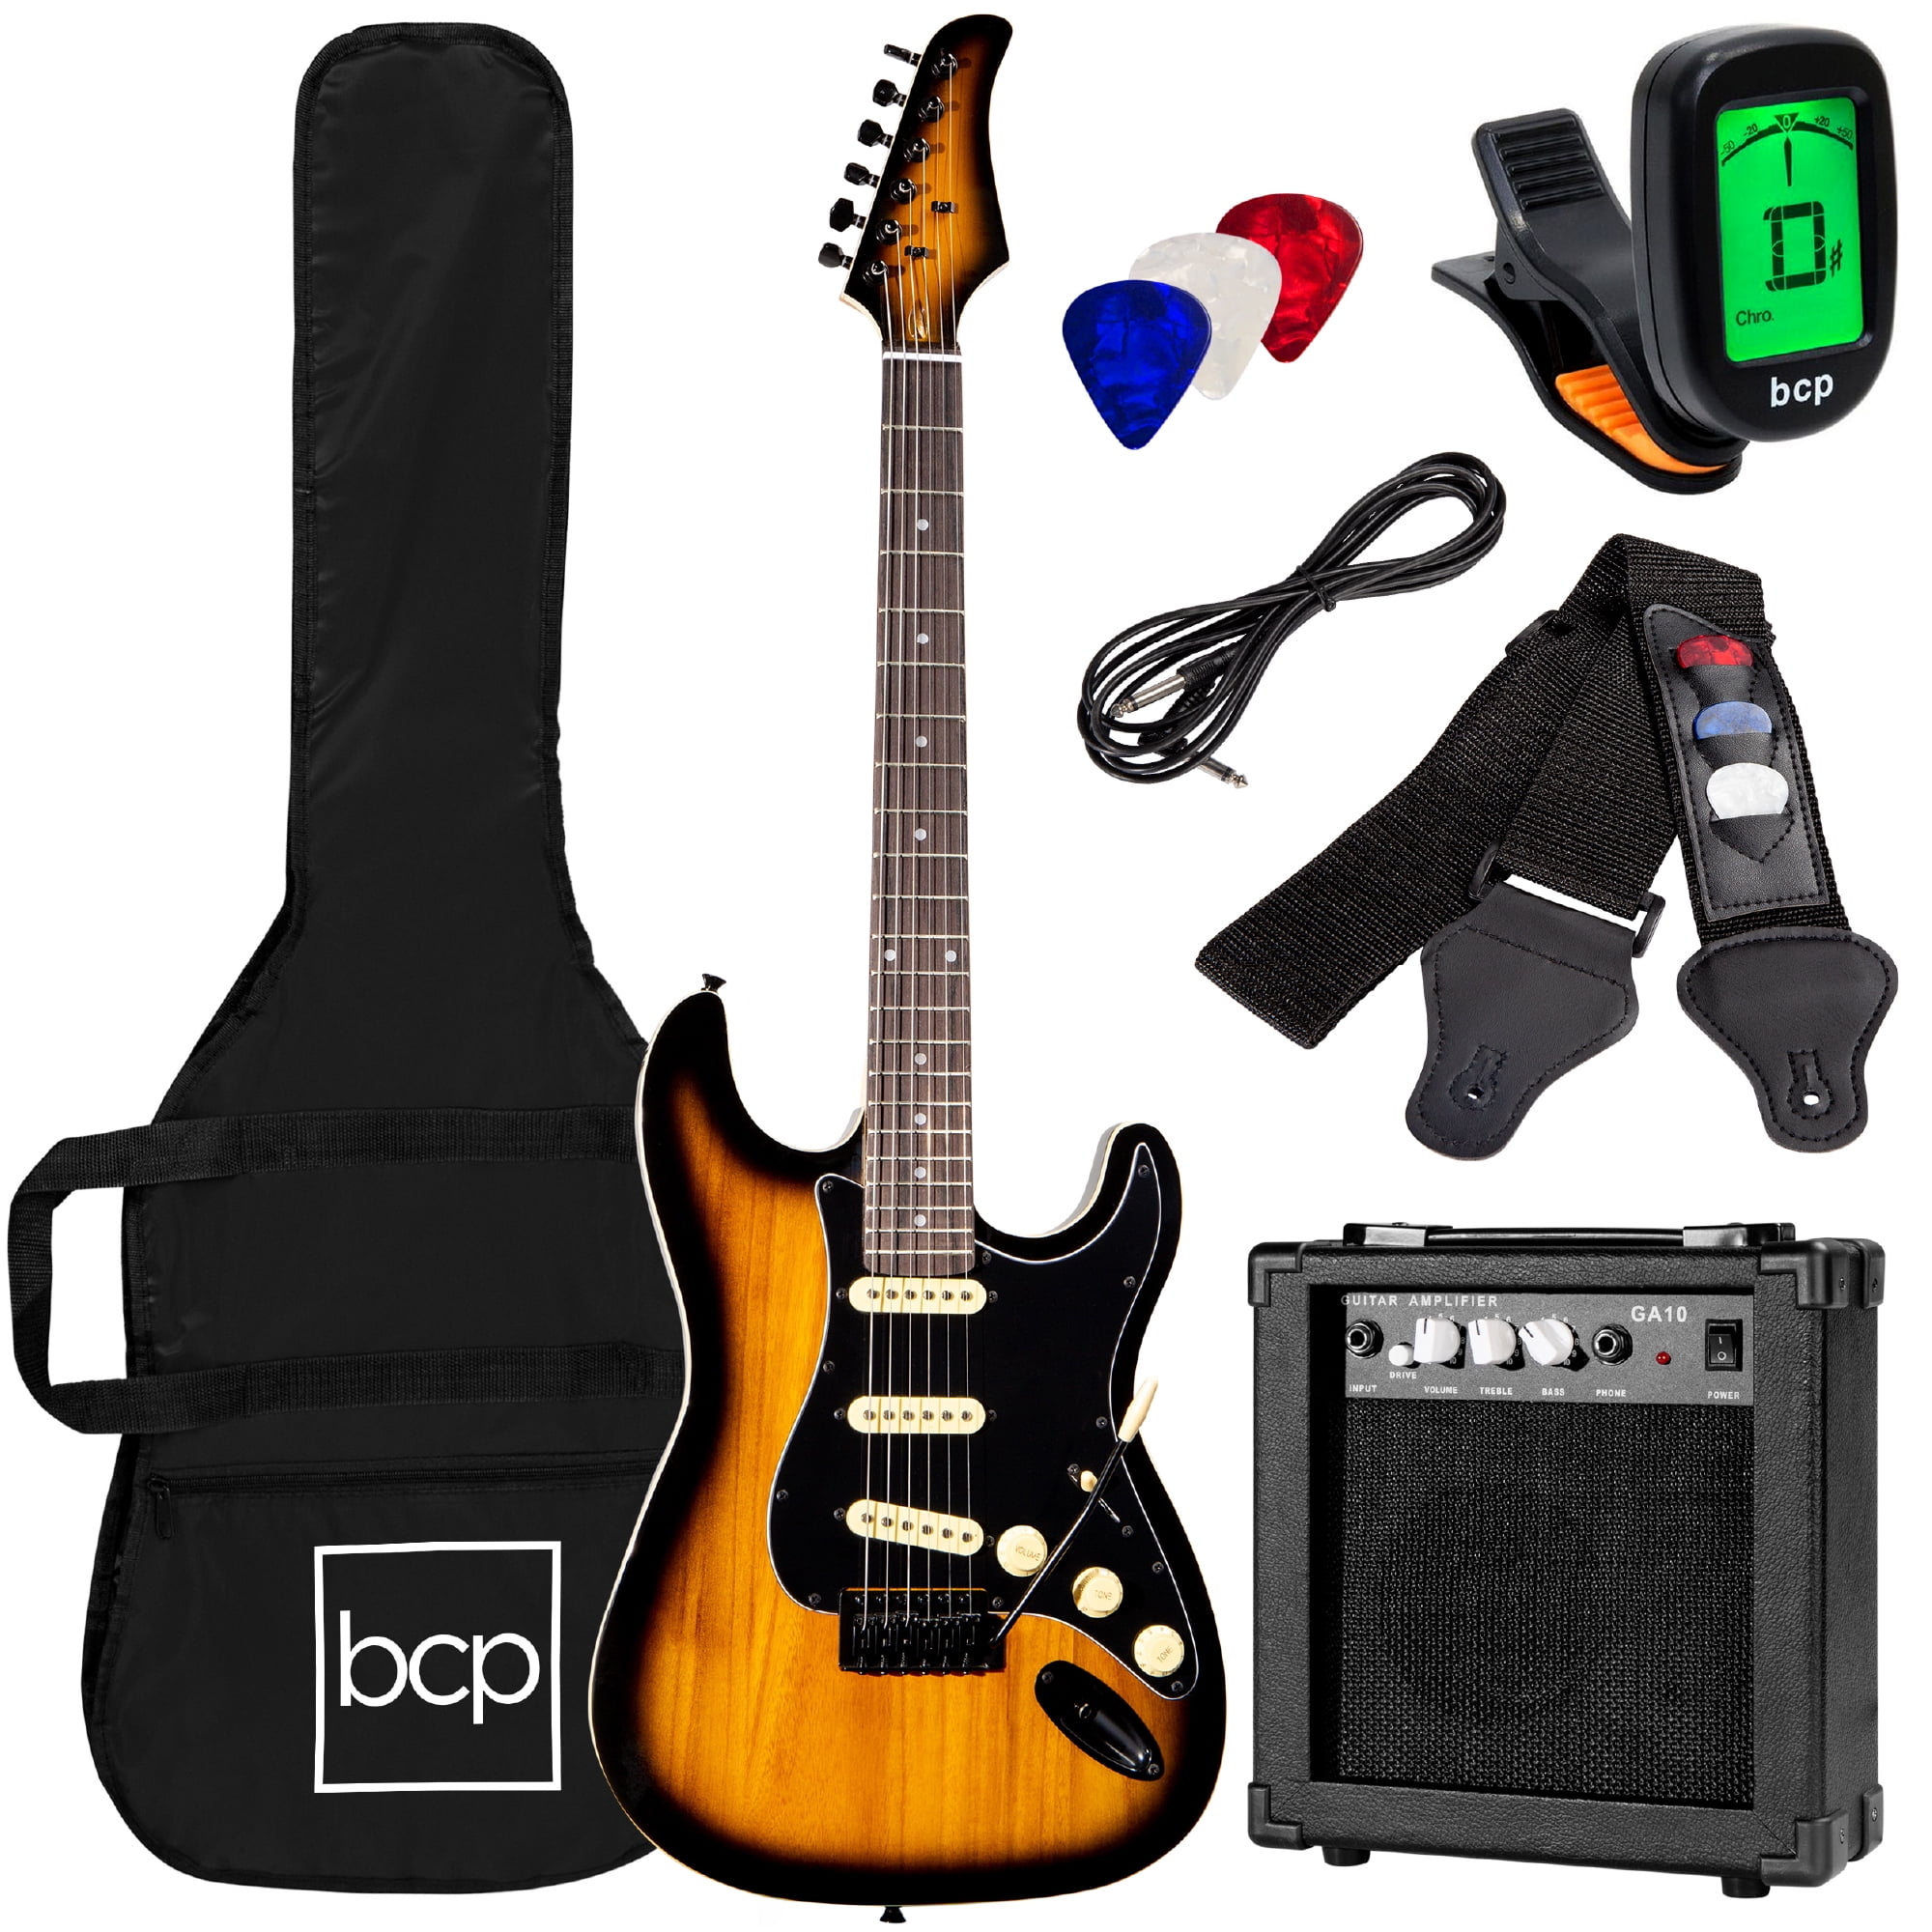 Best Choice Products 39in Full Size Beginner Electric Guitar Kit with Case, Strap, Amp, Whammy Bar - 3 Color Sunburst